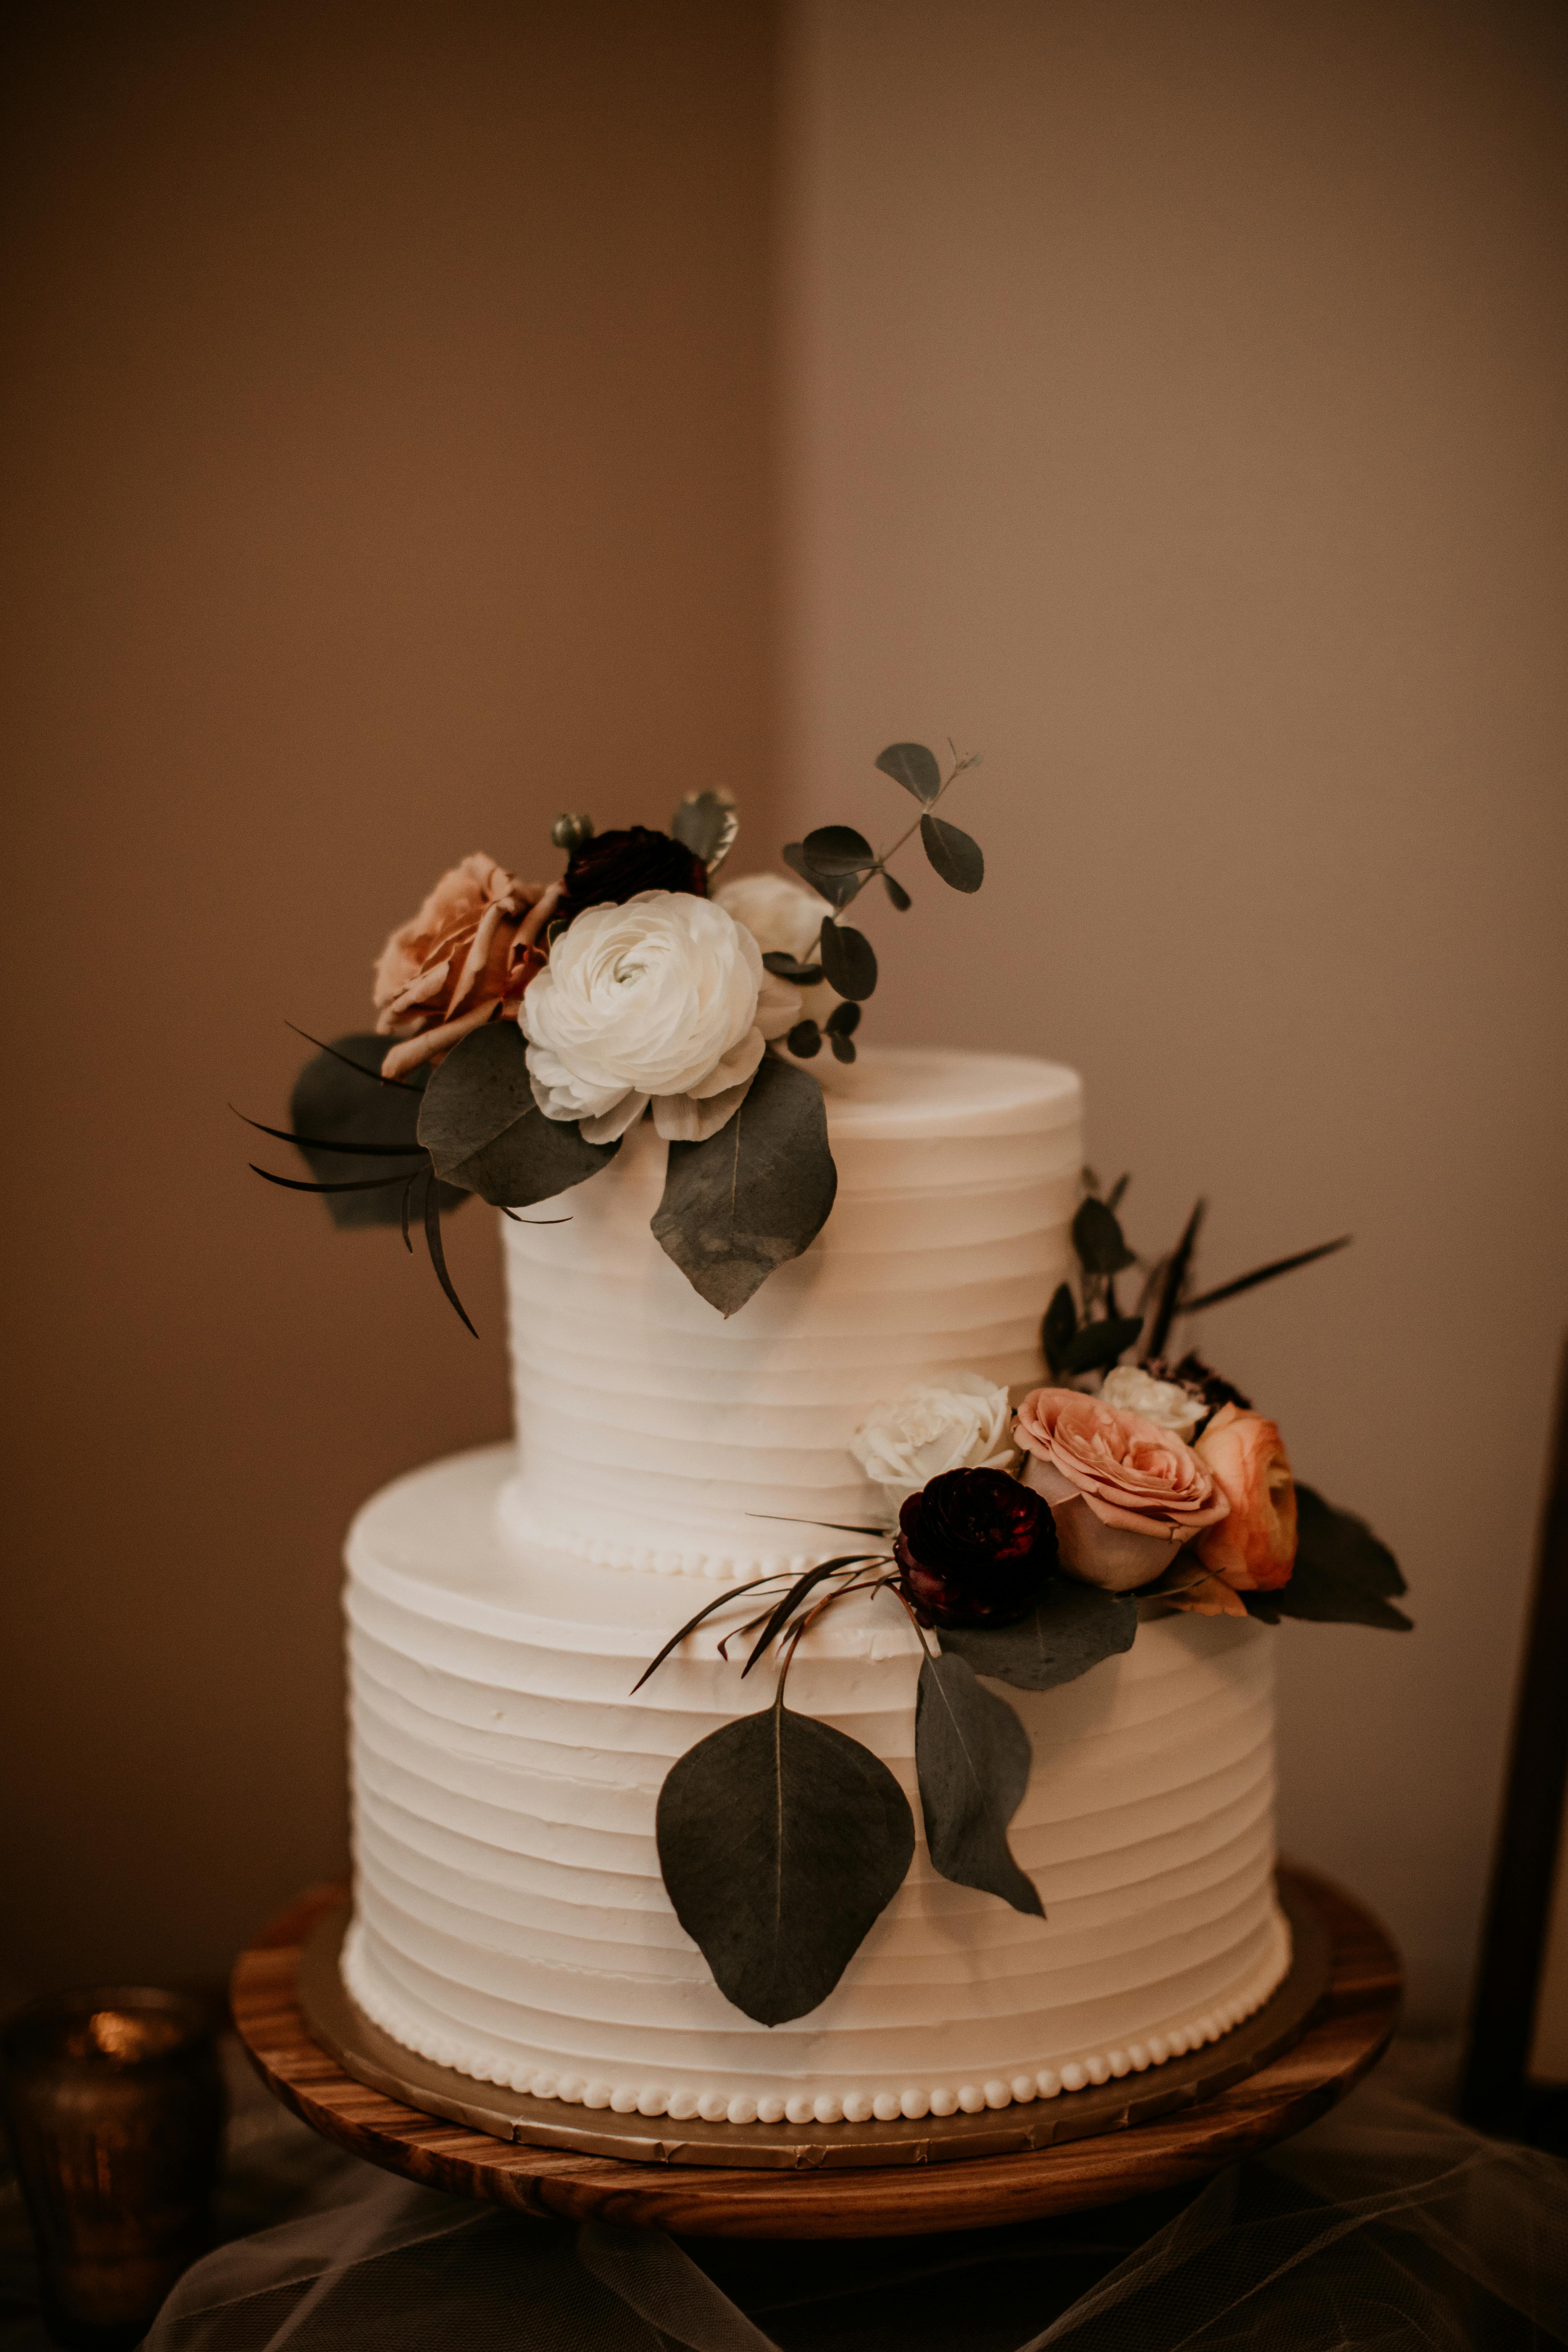 We finally had a cake for my wedding! | Source: Pexels